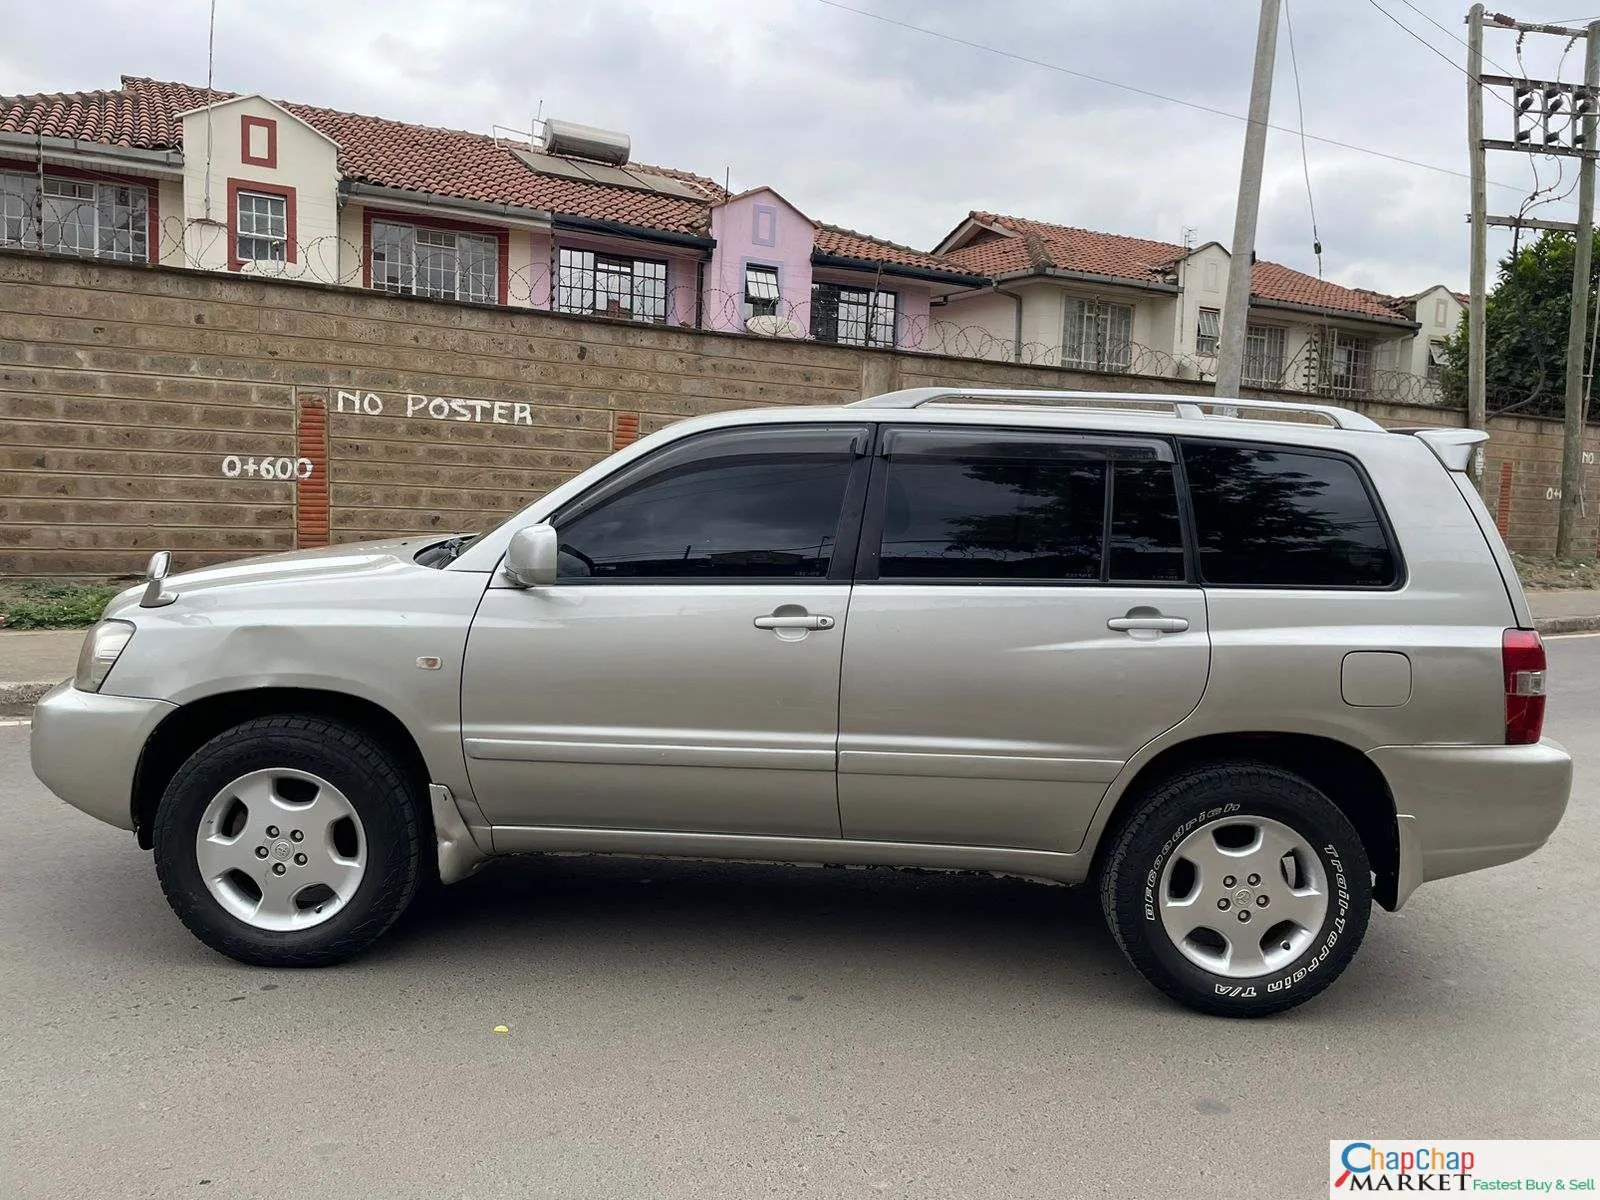 Toyota KLUGER for sale in Kenya 🔥 QUICK You pay 70% Deposit INSTALLMENTS Trade in Ok EXCLUSIVE!